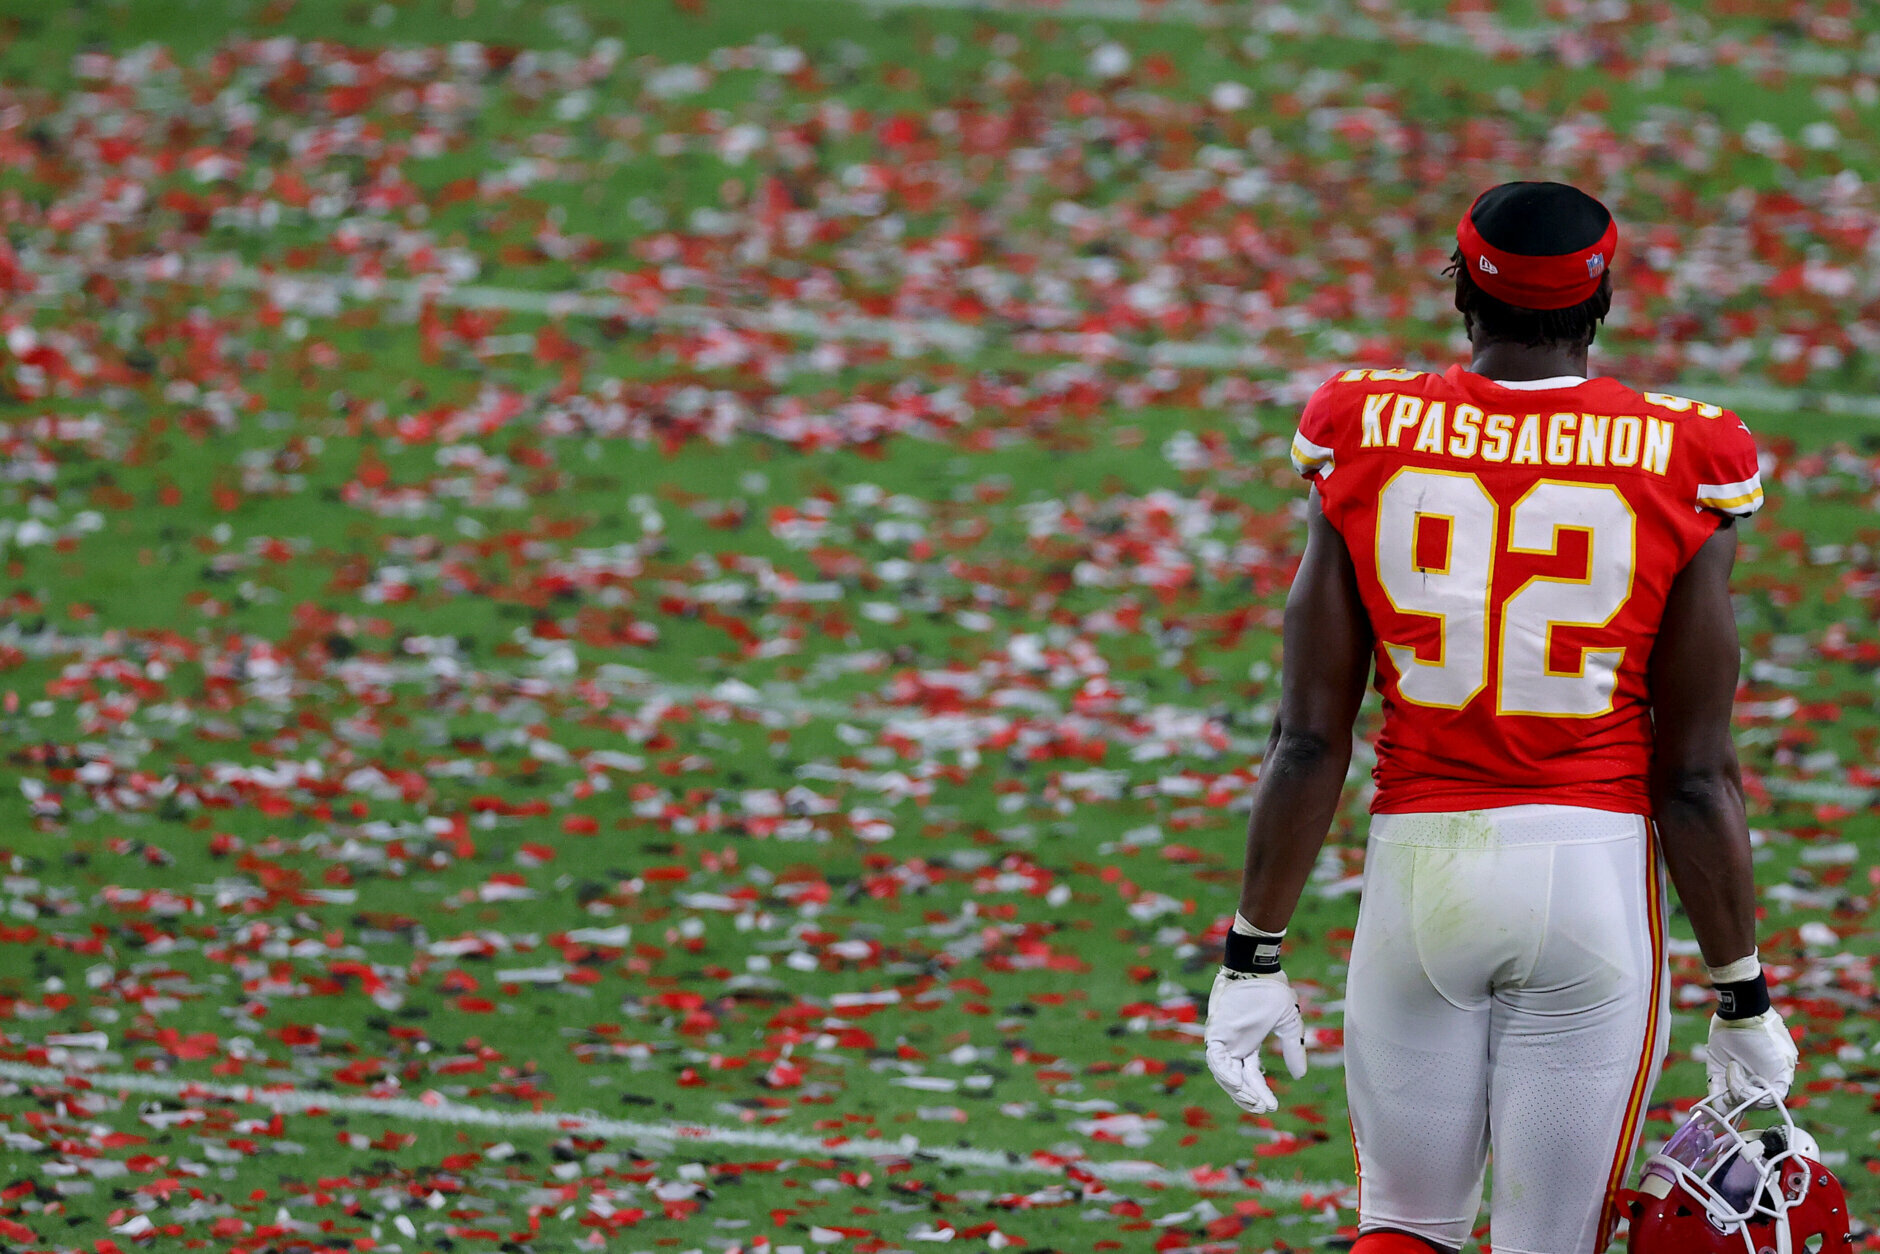 TAMPA, FLORIDA - FEBRUARY 07: Tanoh Kpassagnon #92 of the Kansas City Chiefs walks off the field following the loss to the Tampa Bay Buccaneers in Super Bowl LV at Raymond James Stadium on February 07, 2021 in Tampa, Florida. (Photo by Kevin C. Cox/Getty Images)